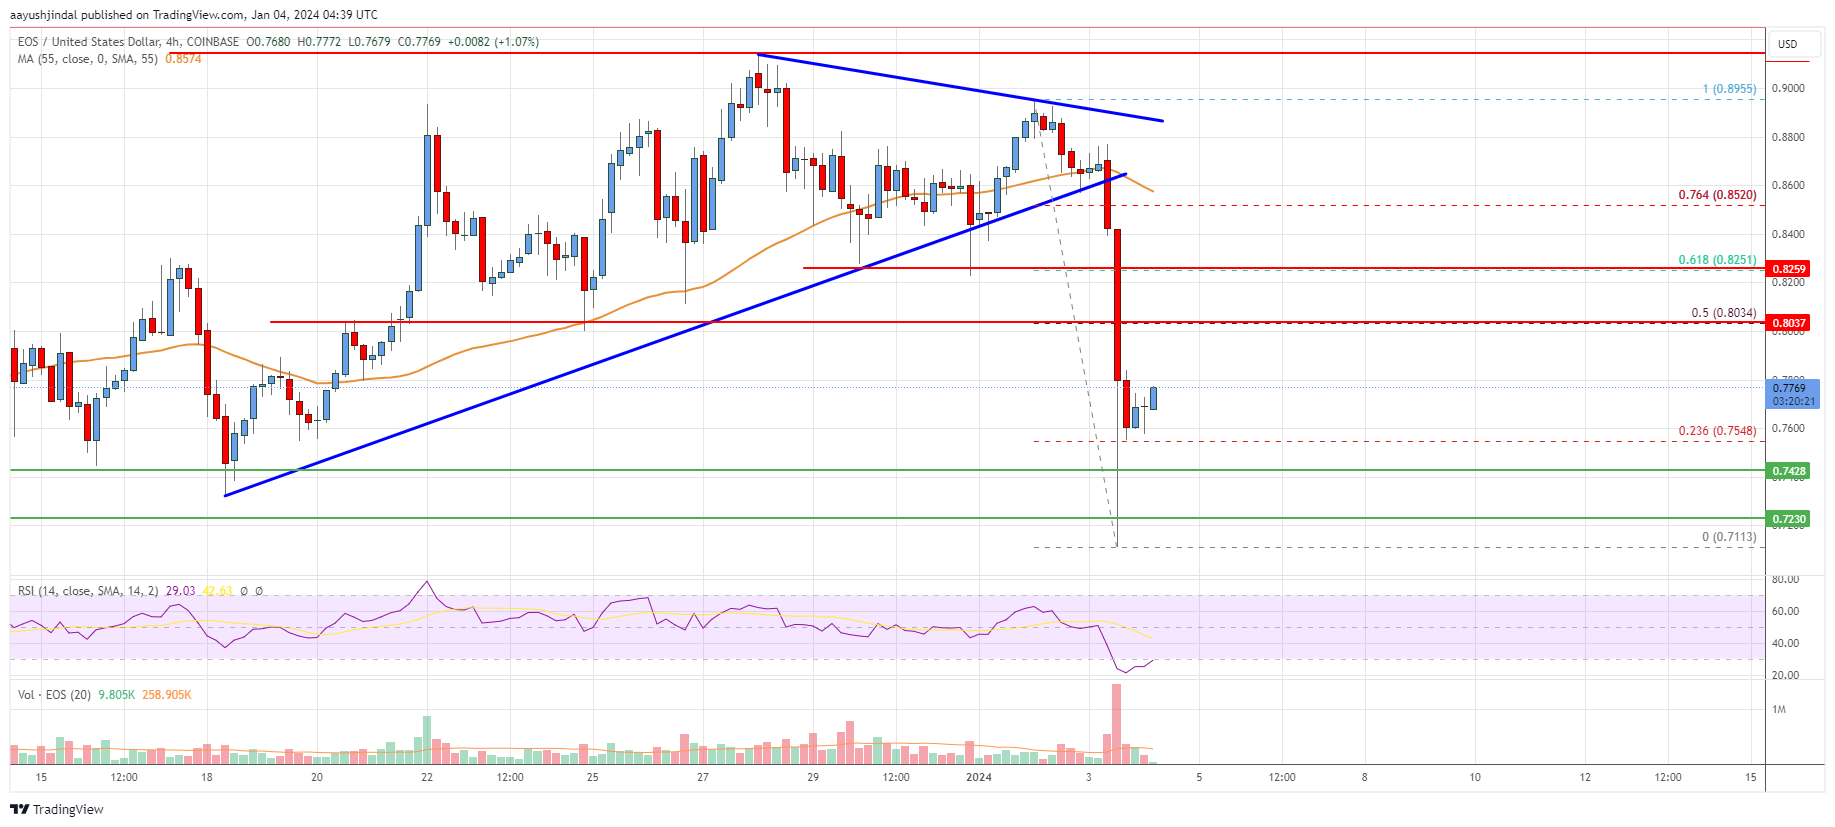 EOS Price Analysis: Upsides Could Be Capped Near $0.825